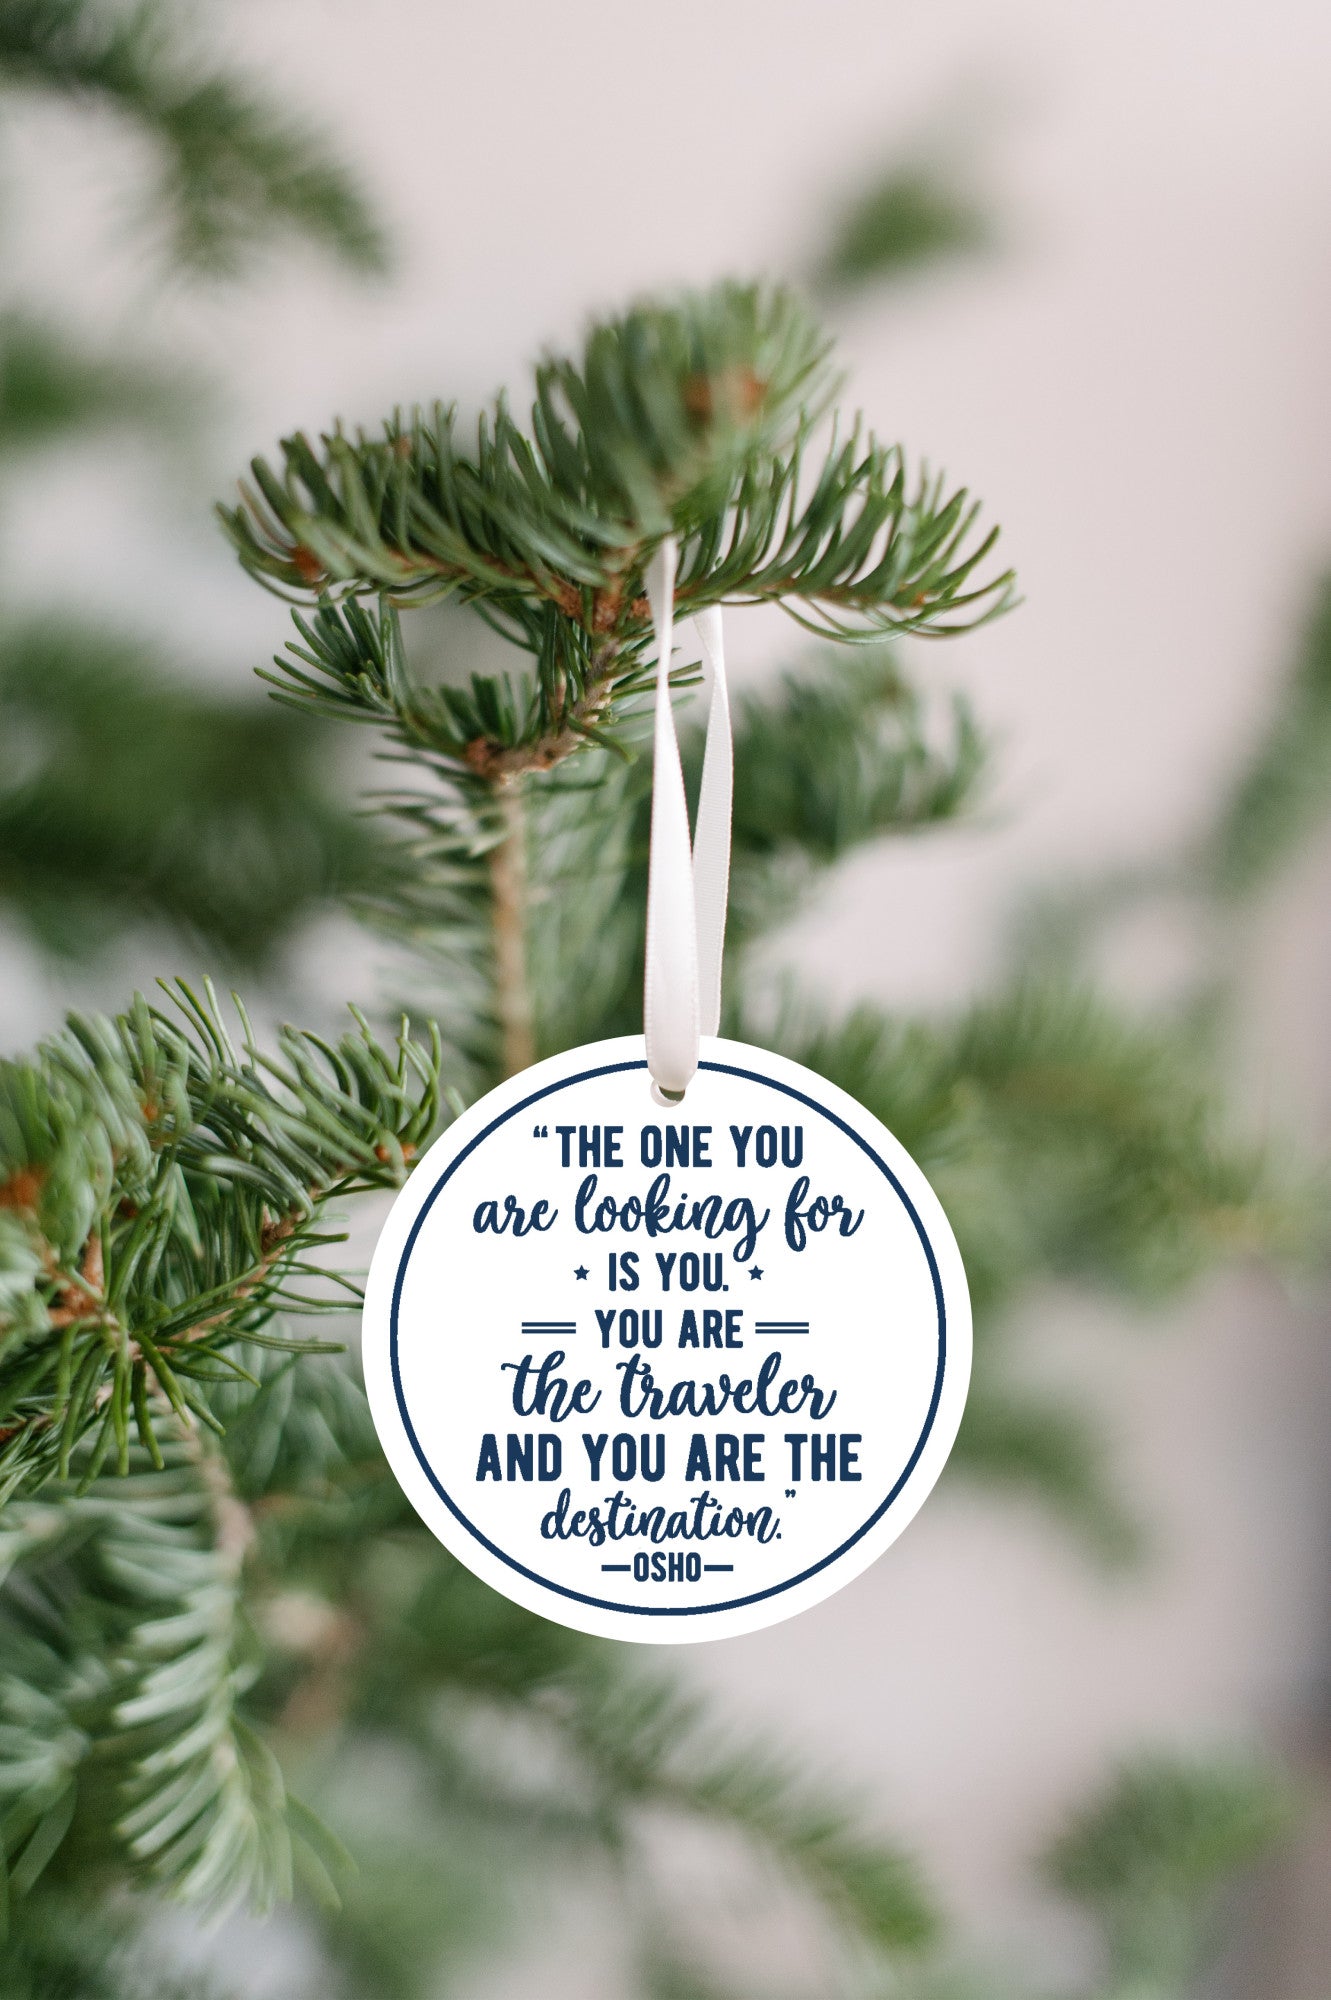 "The One You Are Looking For is You.  You are the Traveler and the Destination" - OSHO Ornament